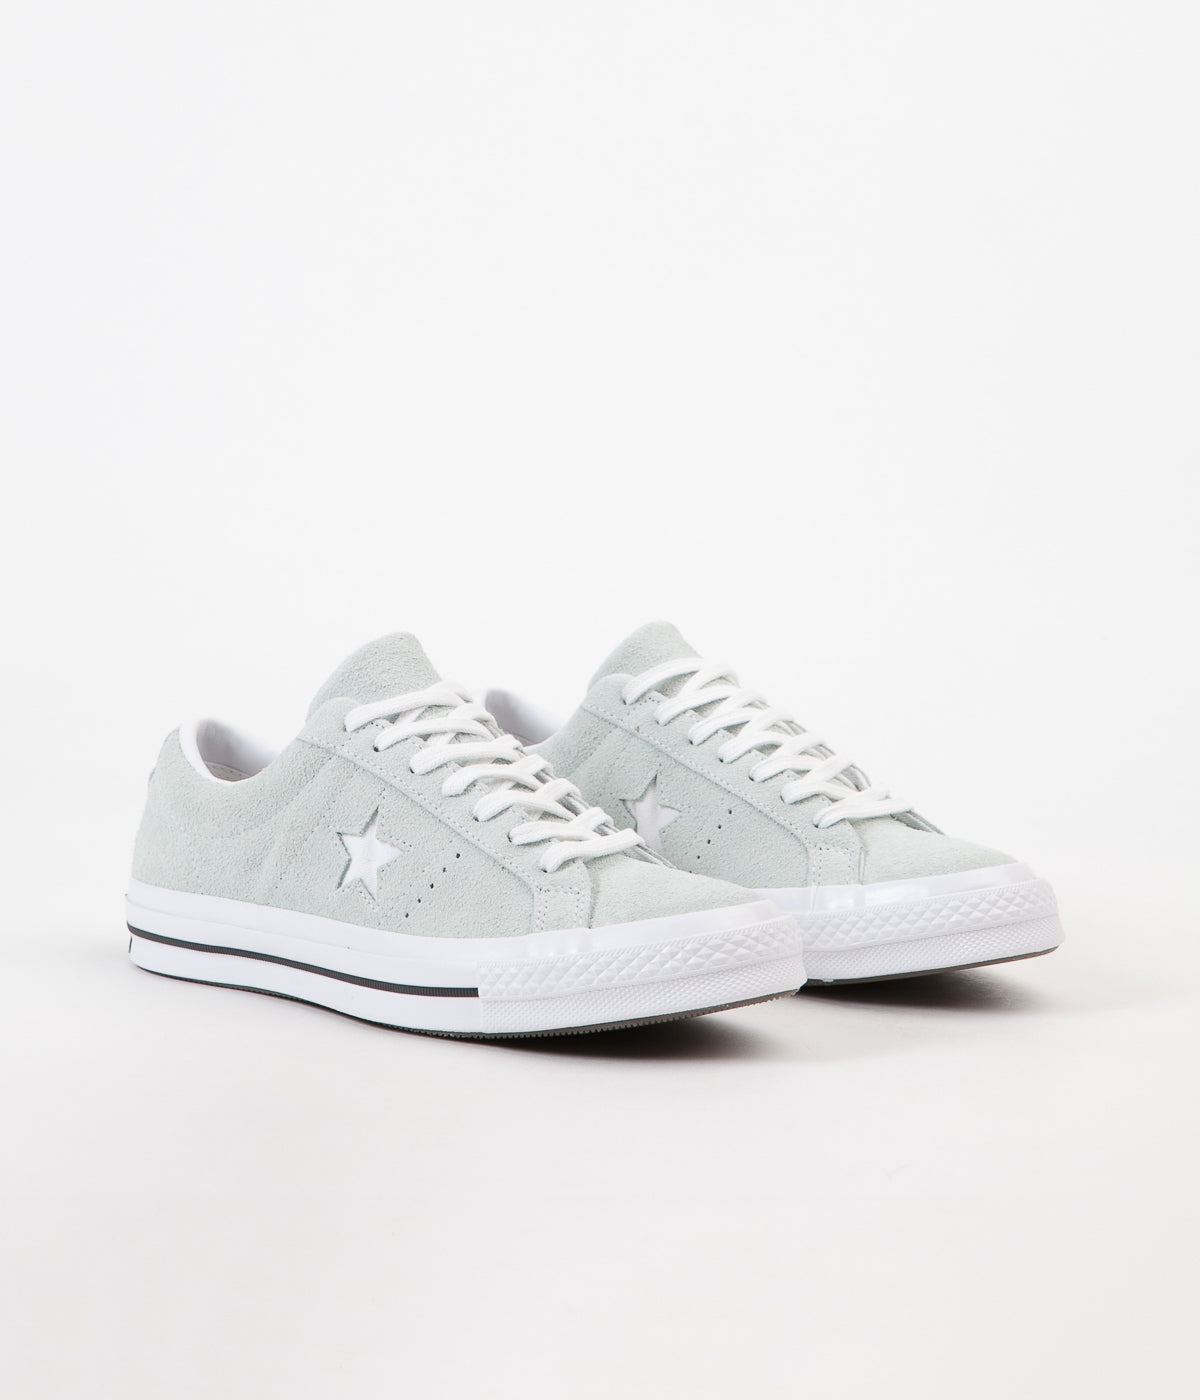 converse one star ox dried bamboo